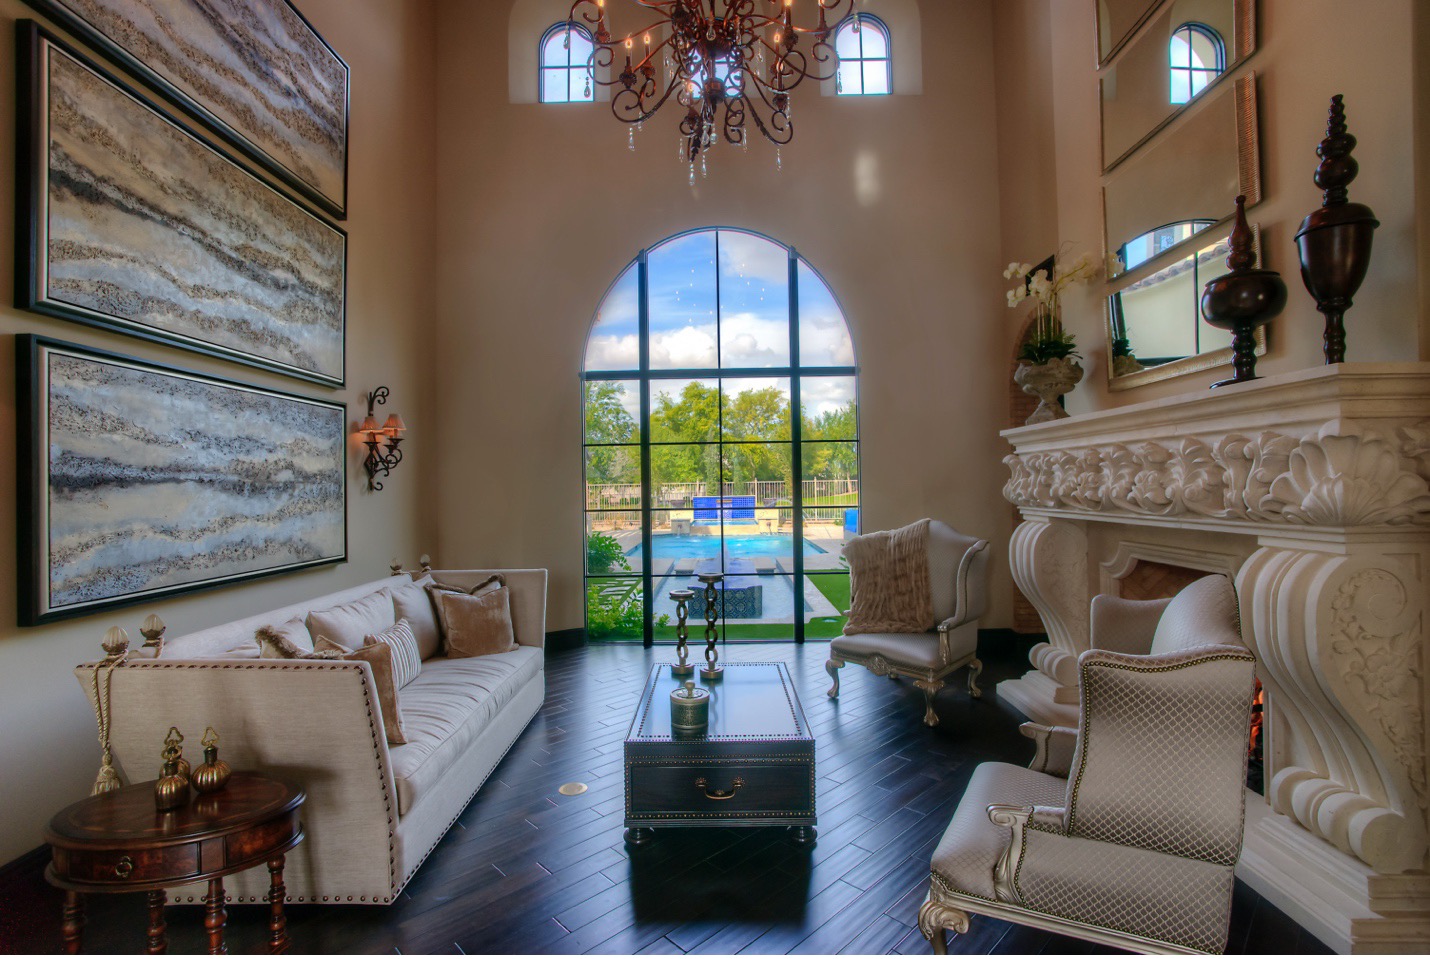 A luxurious Mediterranean-style living room featuring a high ceiling with elegant chandeliers and large arched windows offering a view of the outdoor pool area. The room is decorated with a grand, ornately carved fireplace mantel and a matching set of plush armchairs and a sofa in neutral tones. The walls are adorned with large abstract paintings and classic wall sconces. A dark wooden coffee table sits at the center of the room, complemented by a small side table with decorative items. The dark hardwood floors add warmth and contrast to the light-colored furnishings and walls, creating a sophisticated and inviting atmosphere.